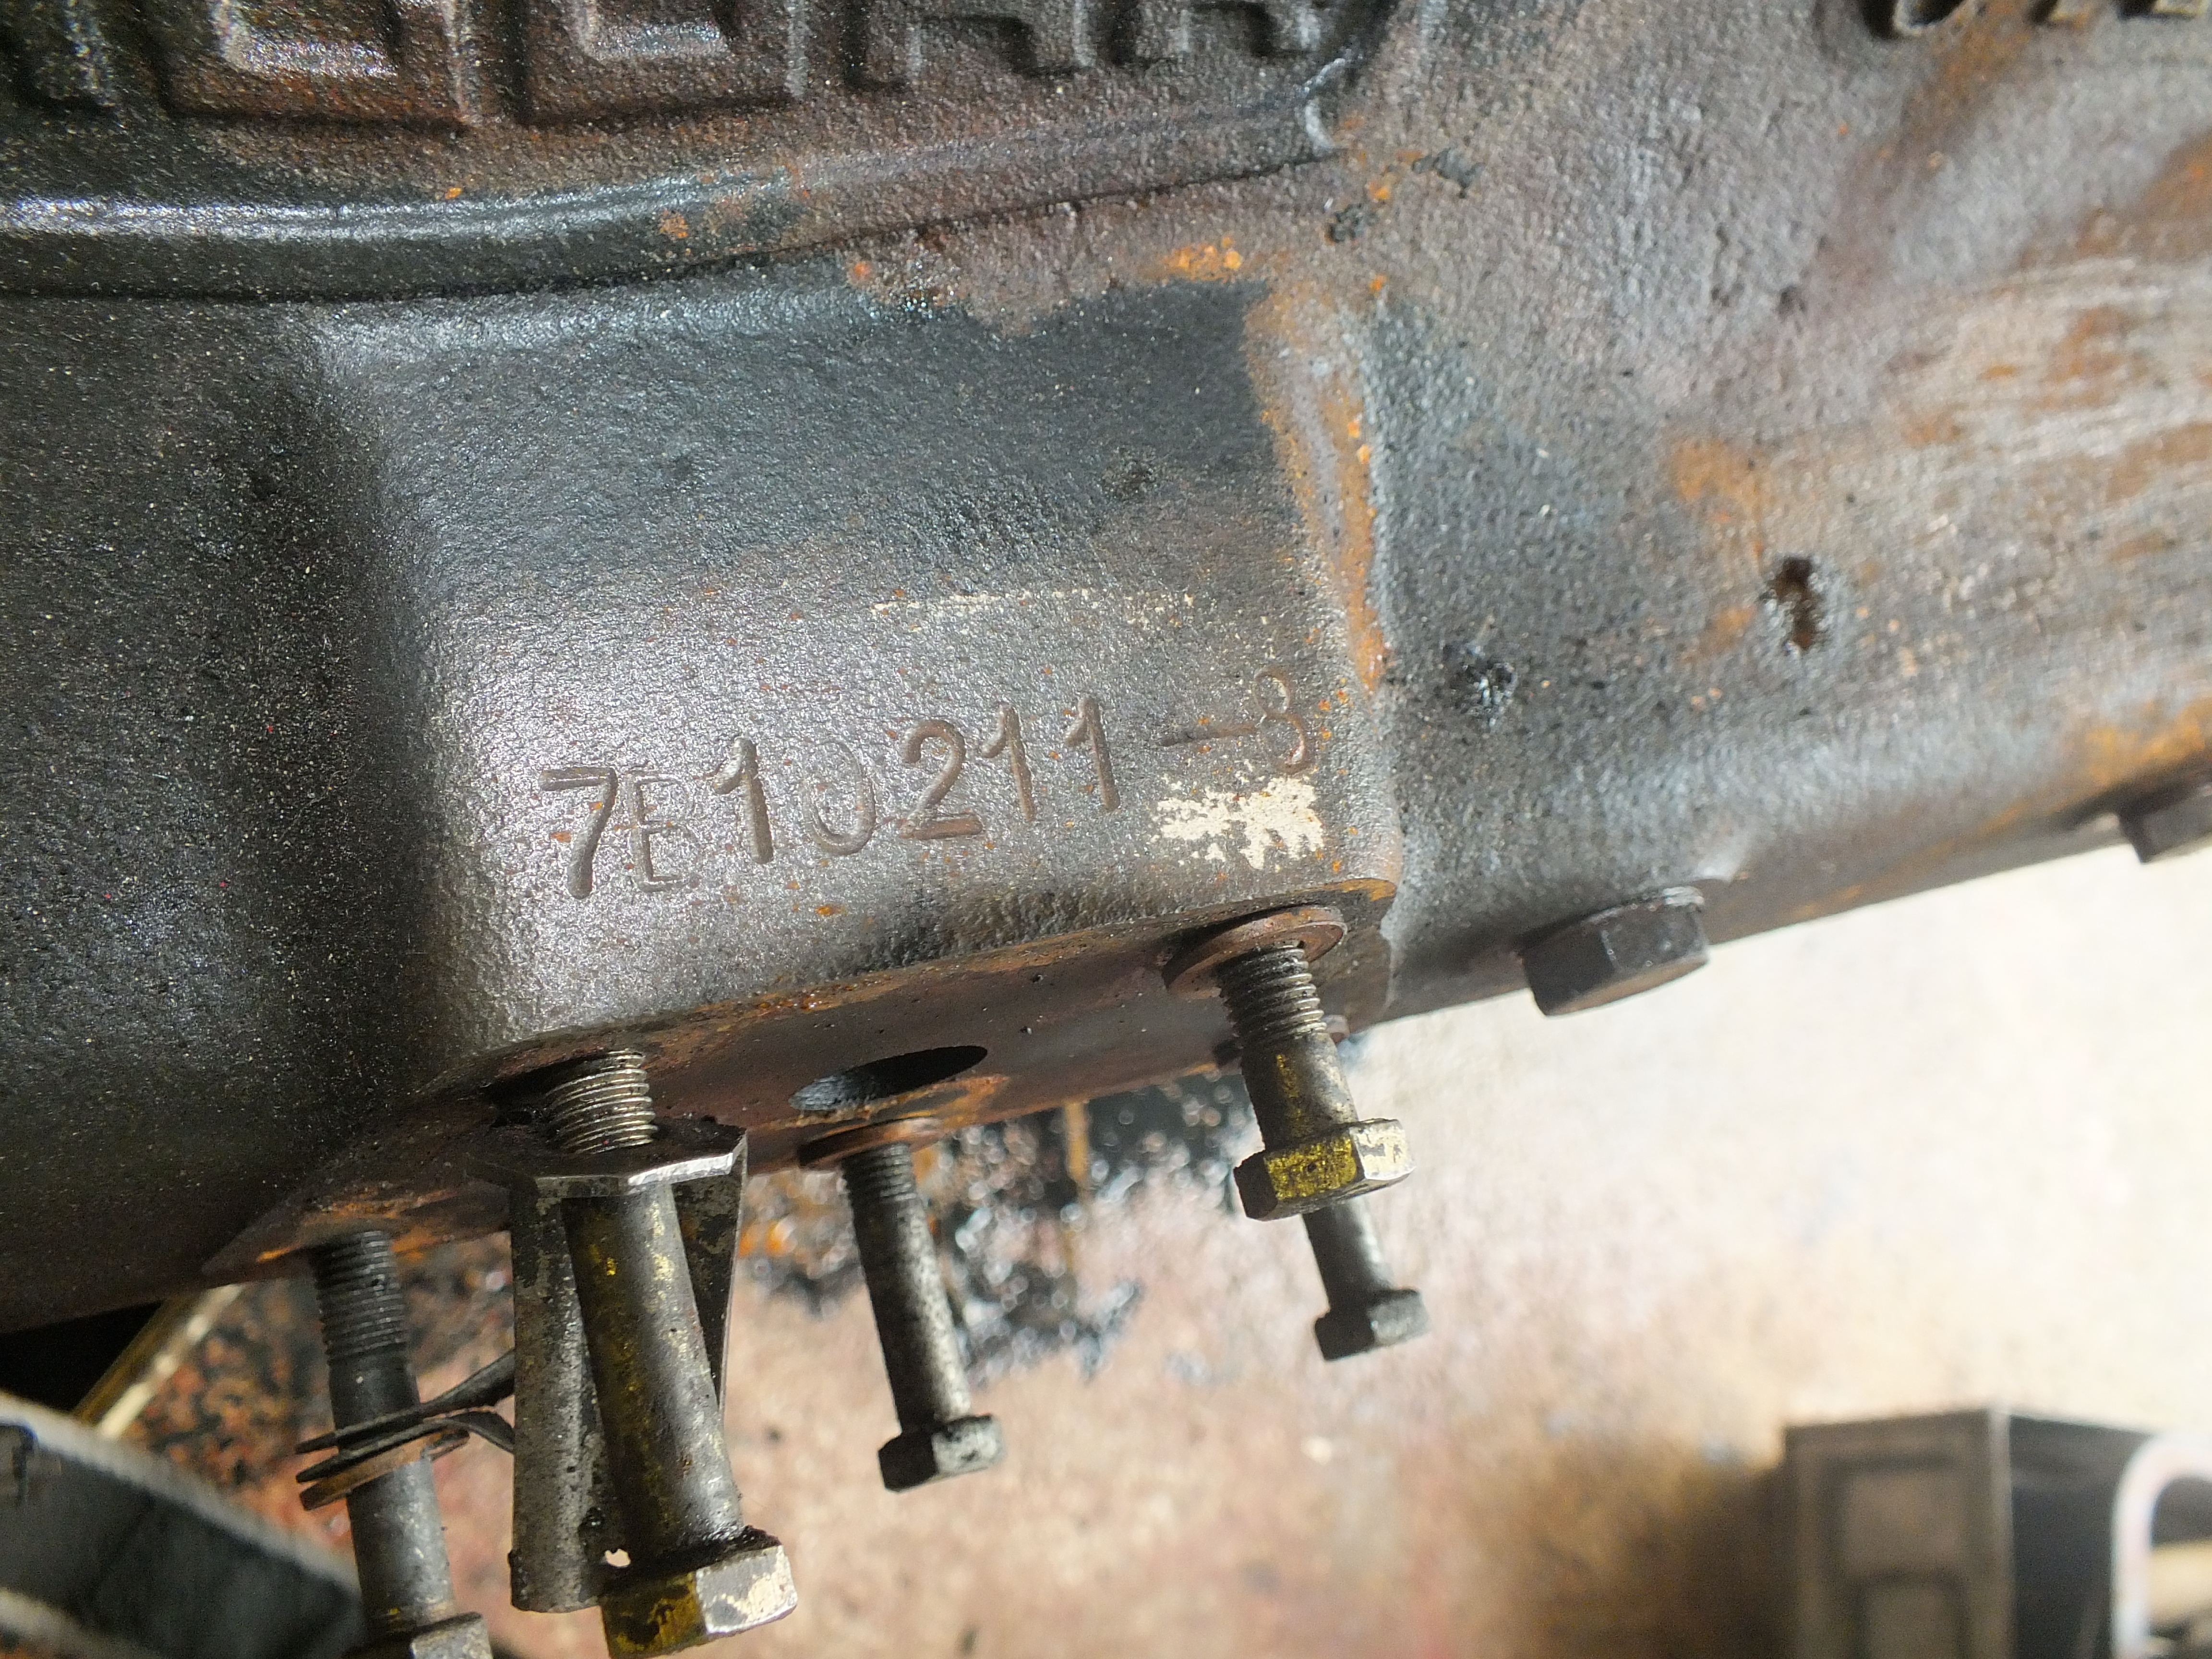 Engine number on top of oil filter housing